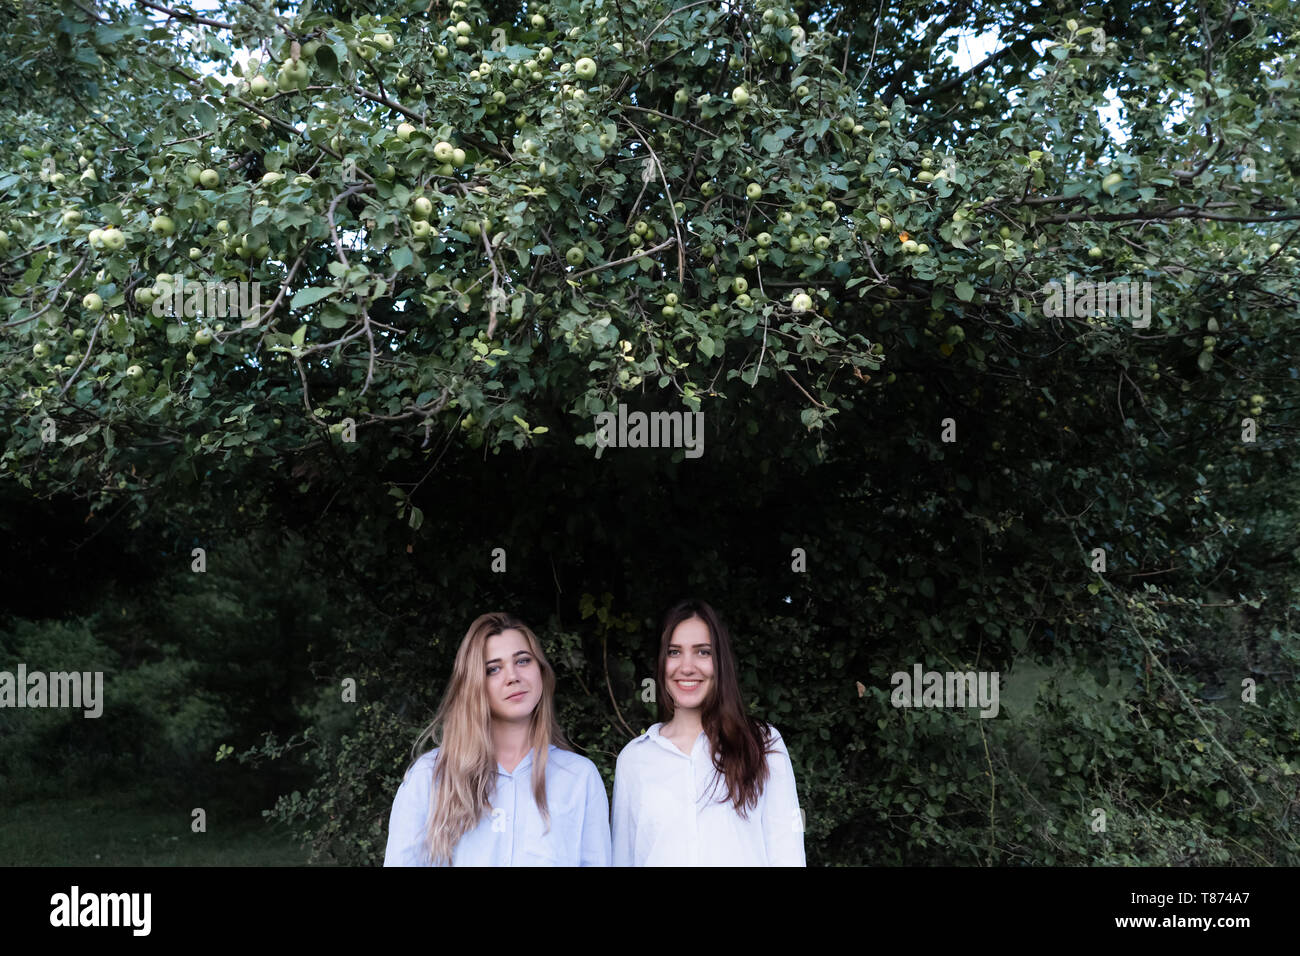 Portrait of two young girls best friends under green apple tree in summer park, friendliness concept. Stock Photo